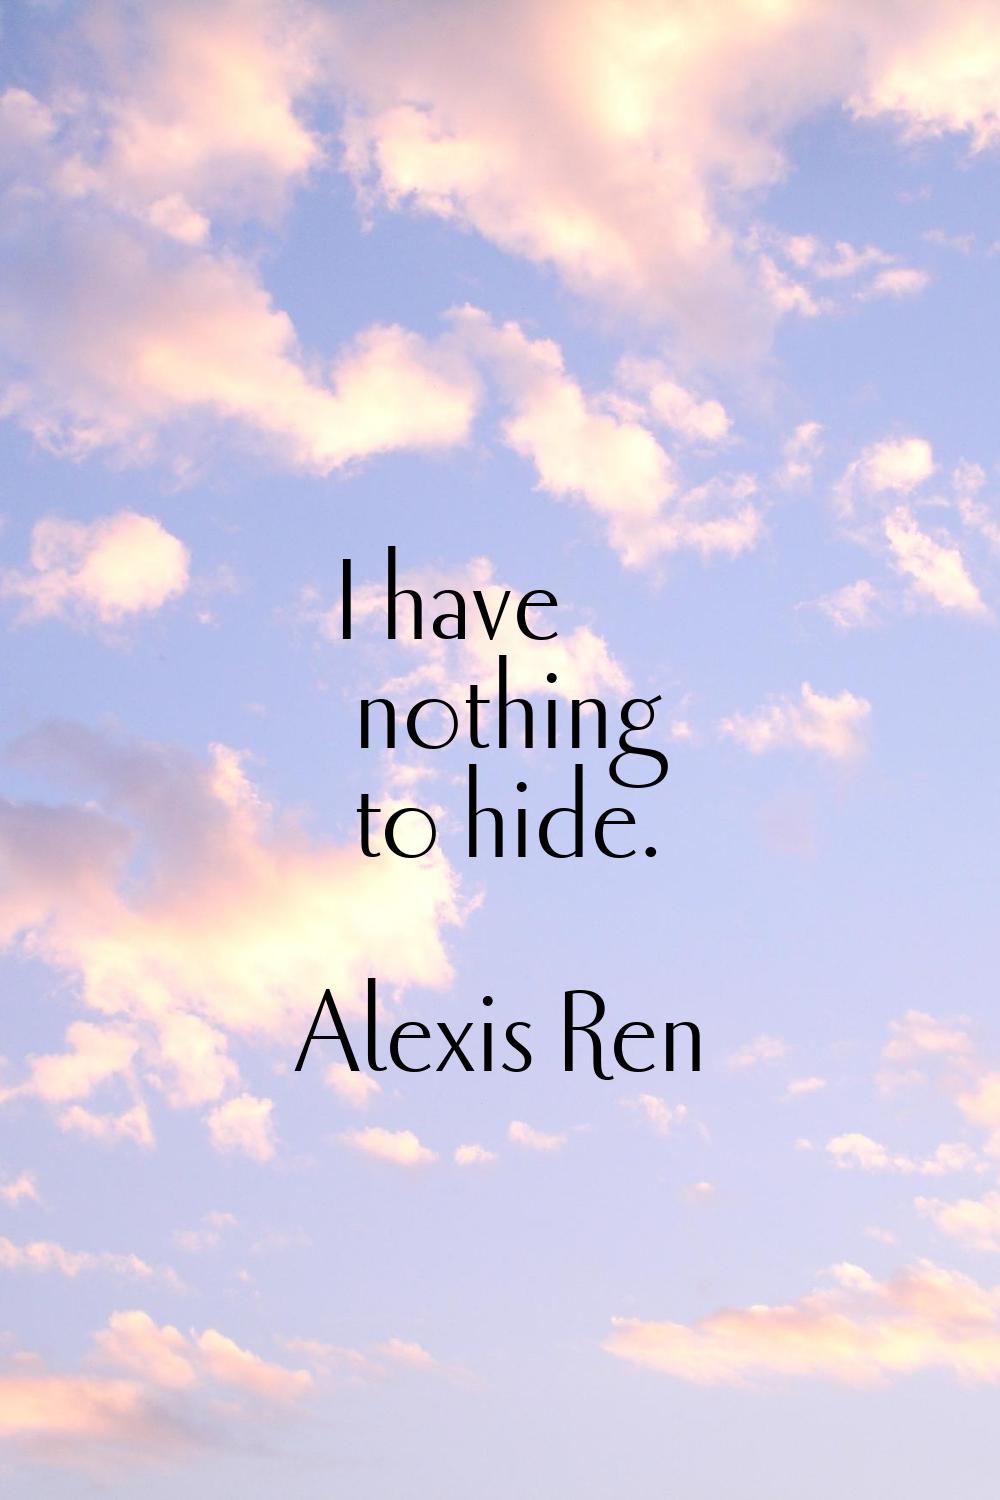 I have nothing to hide.